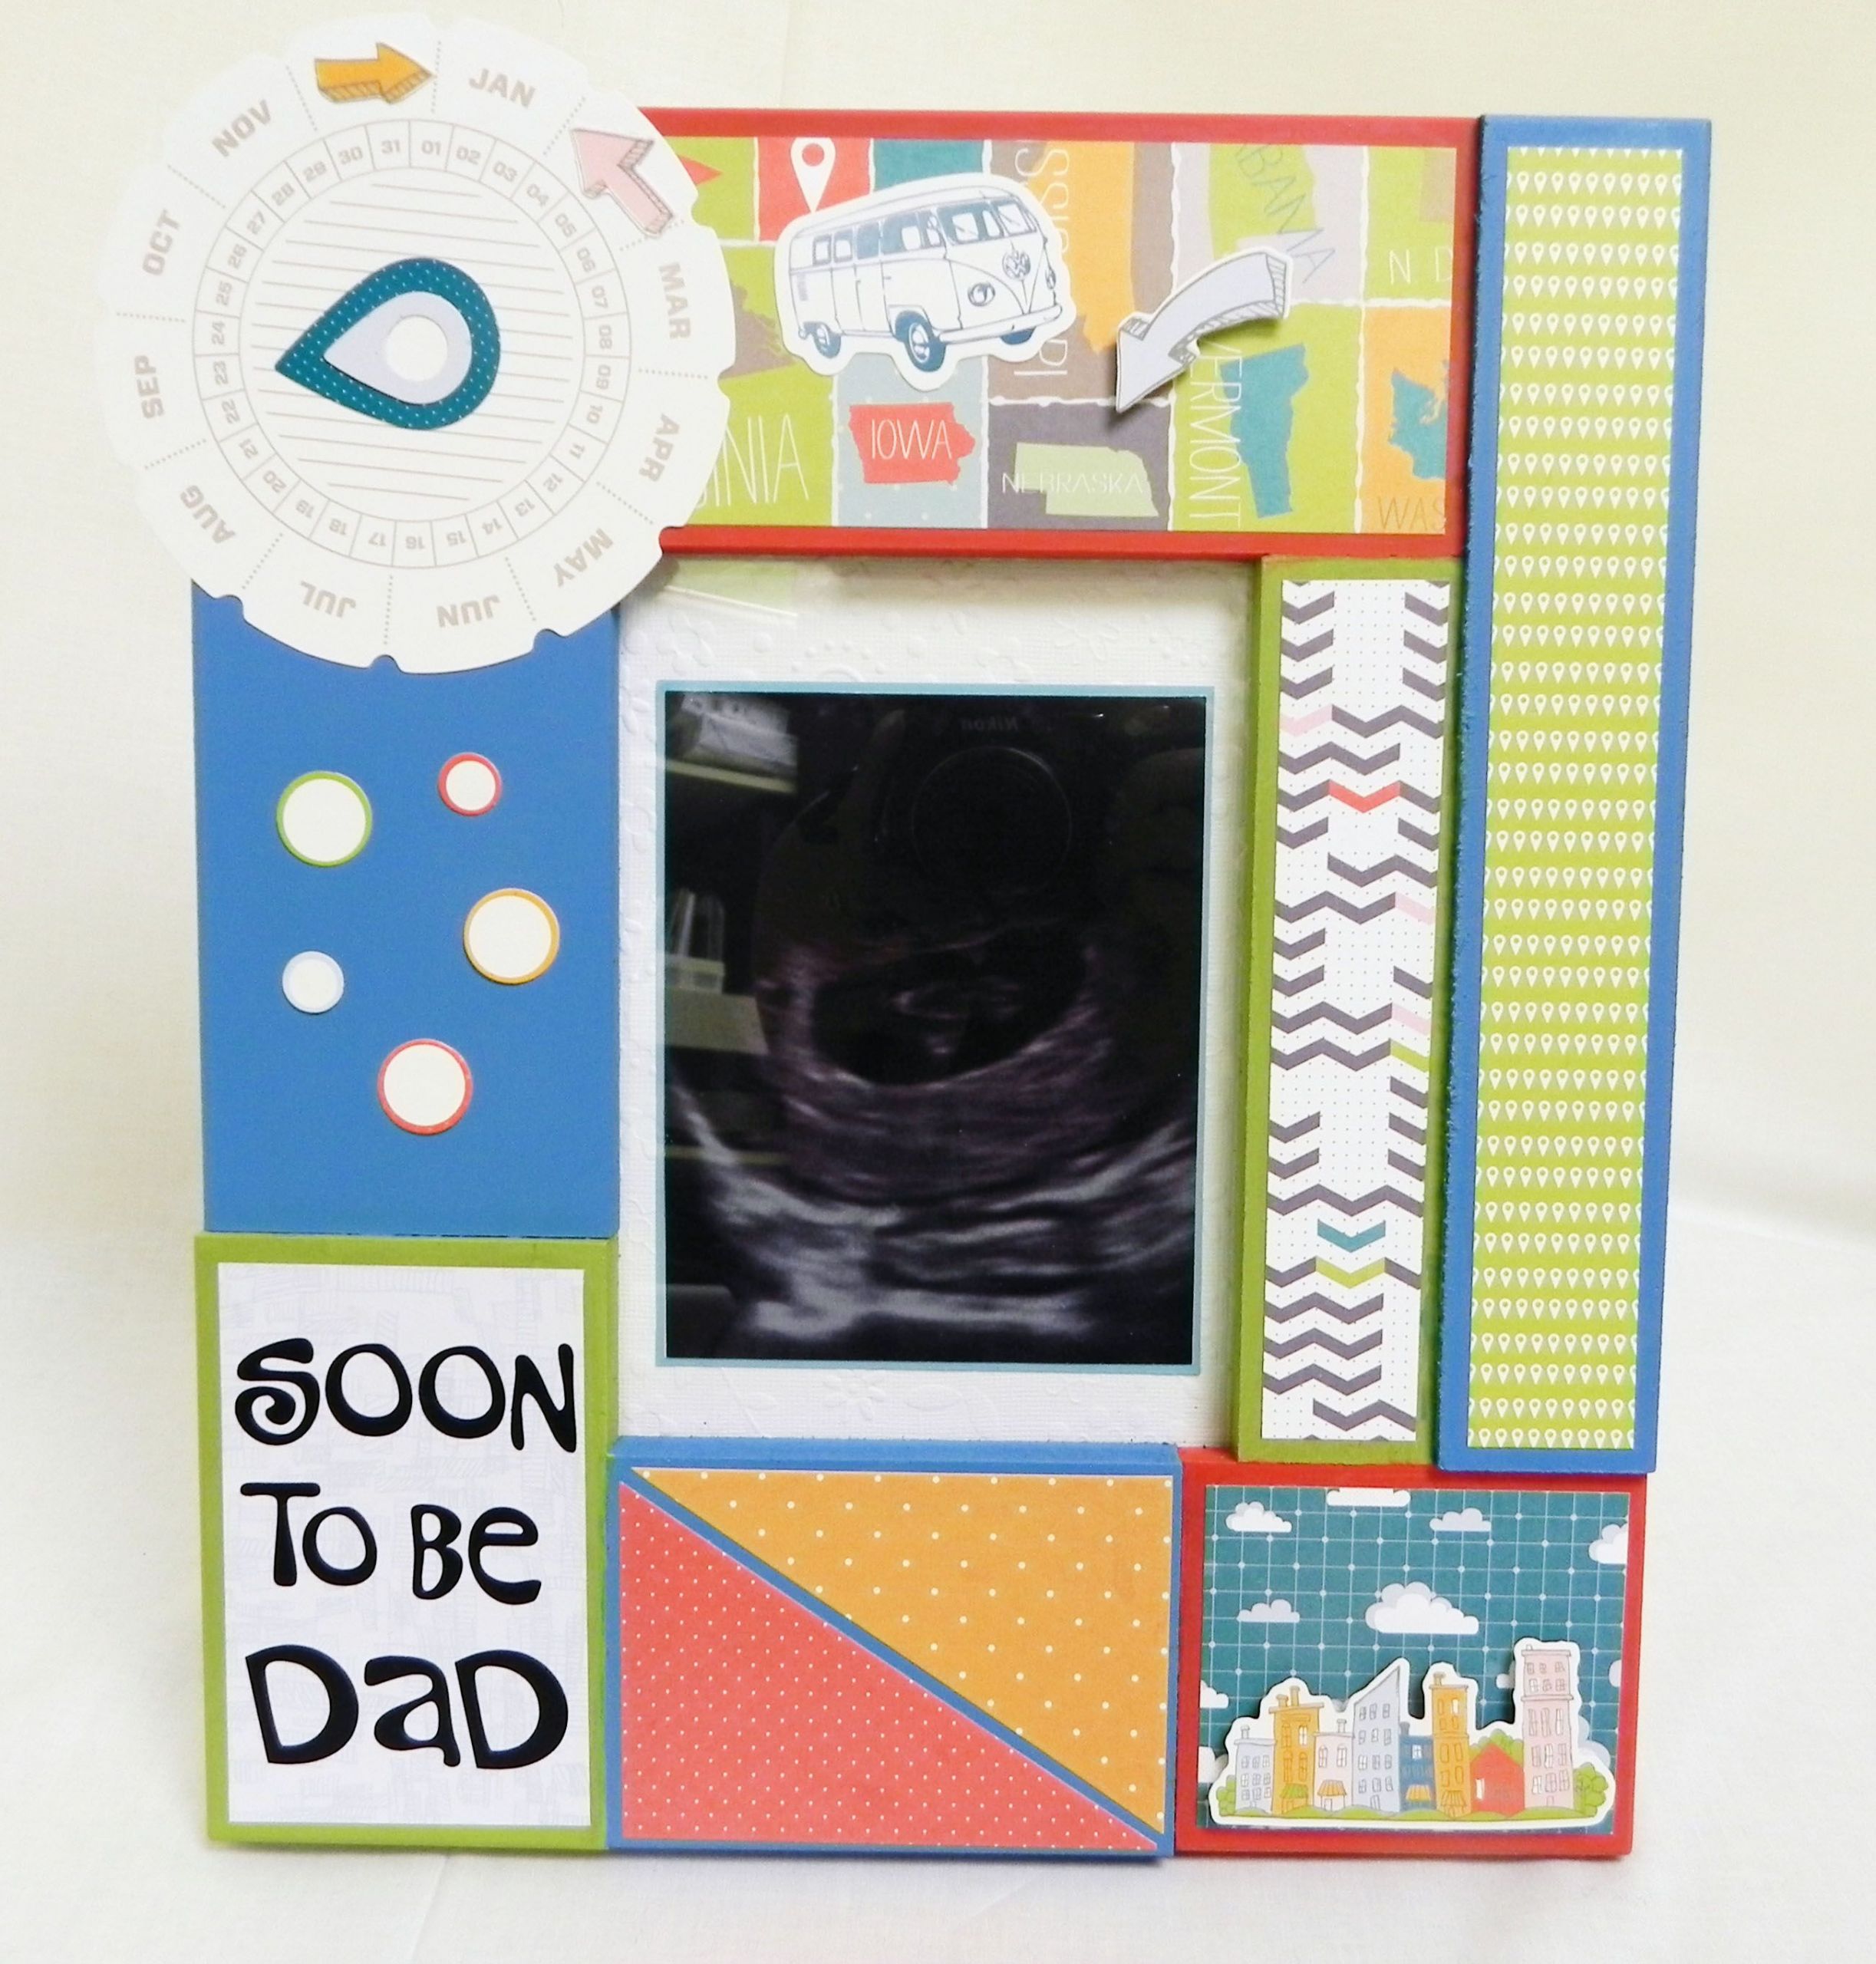 Fathers Day Gift Ideas For Soon To Be Dads
 Soon to be Dad